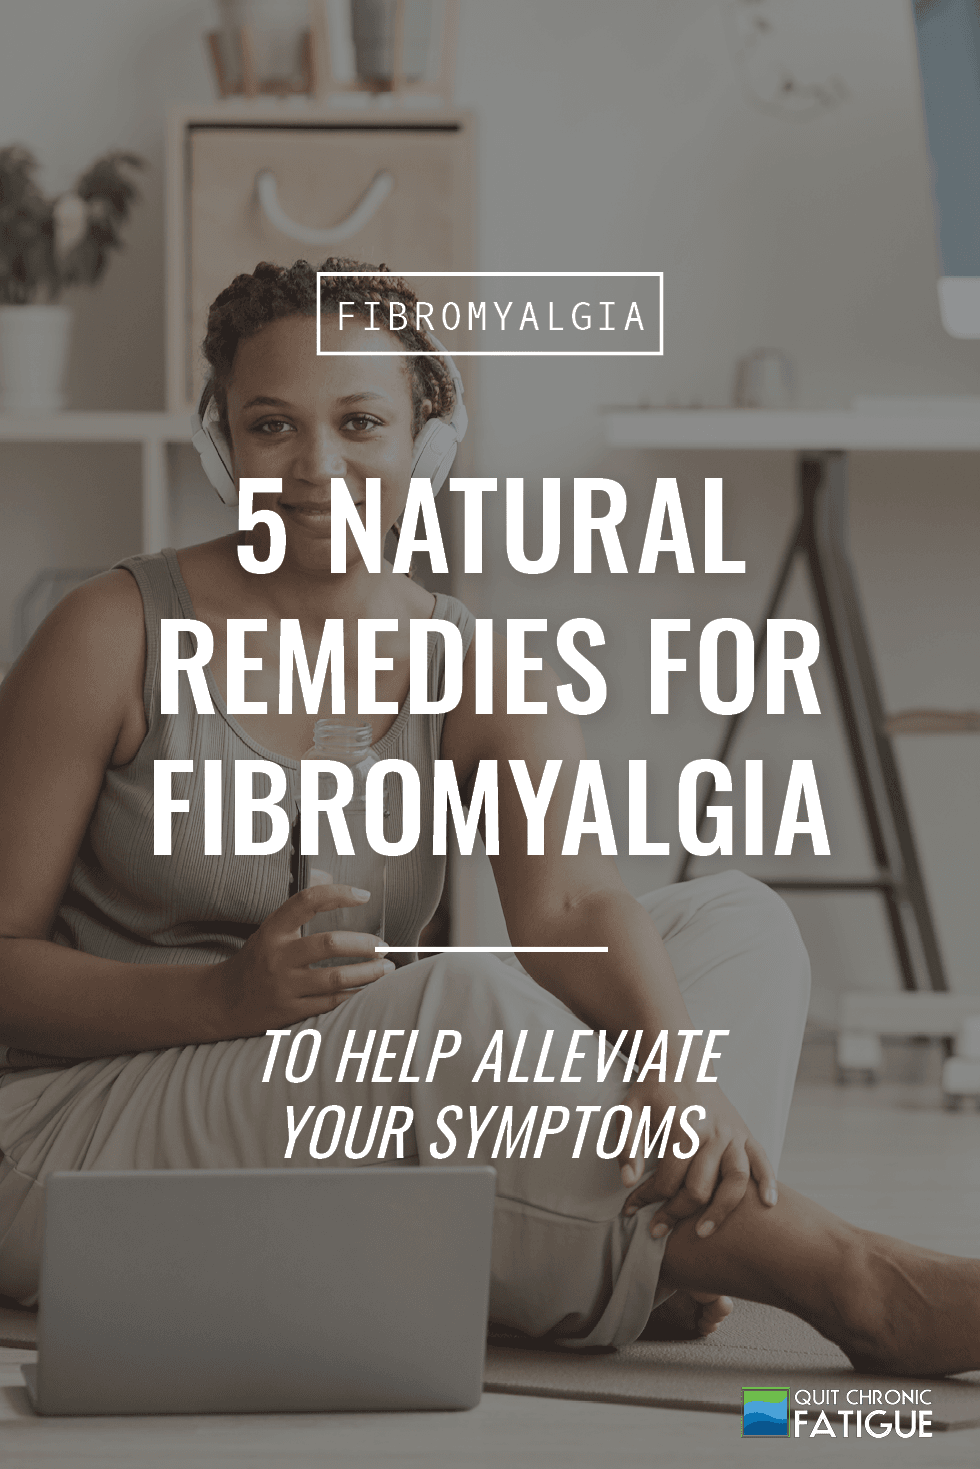 5 Natural Remedies For Fibromyalgia To Help Alleviate Your Symptoms